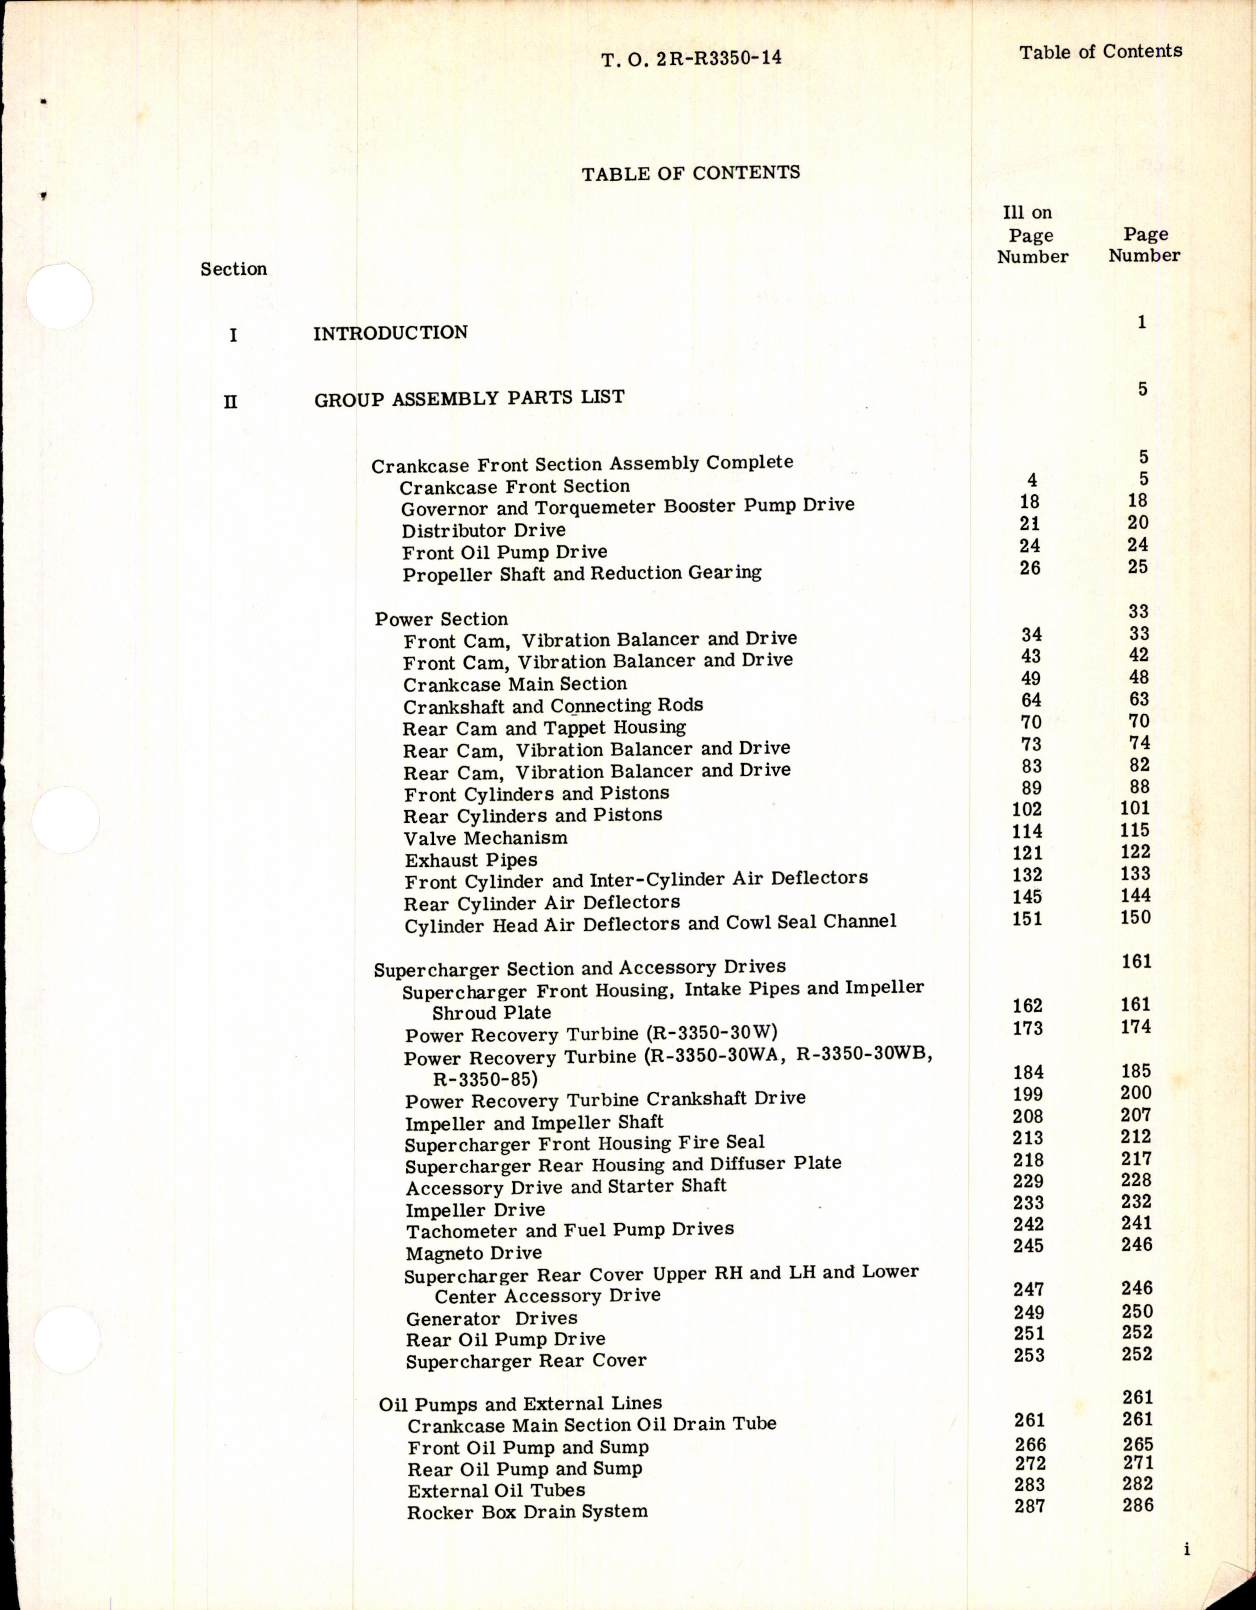 Sample page 3 from AirCorps Library document: Parts Breakdown for R-3350-30W Series